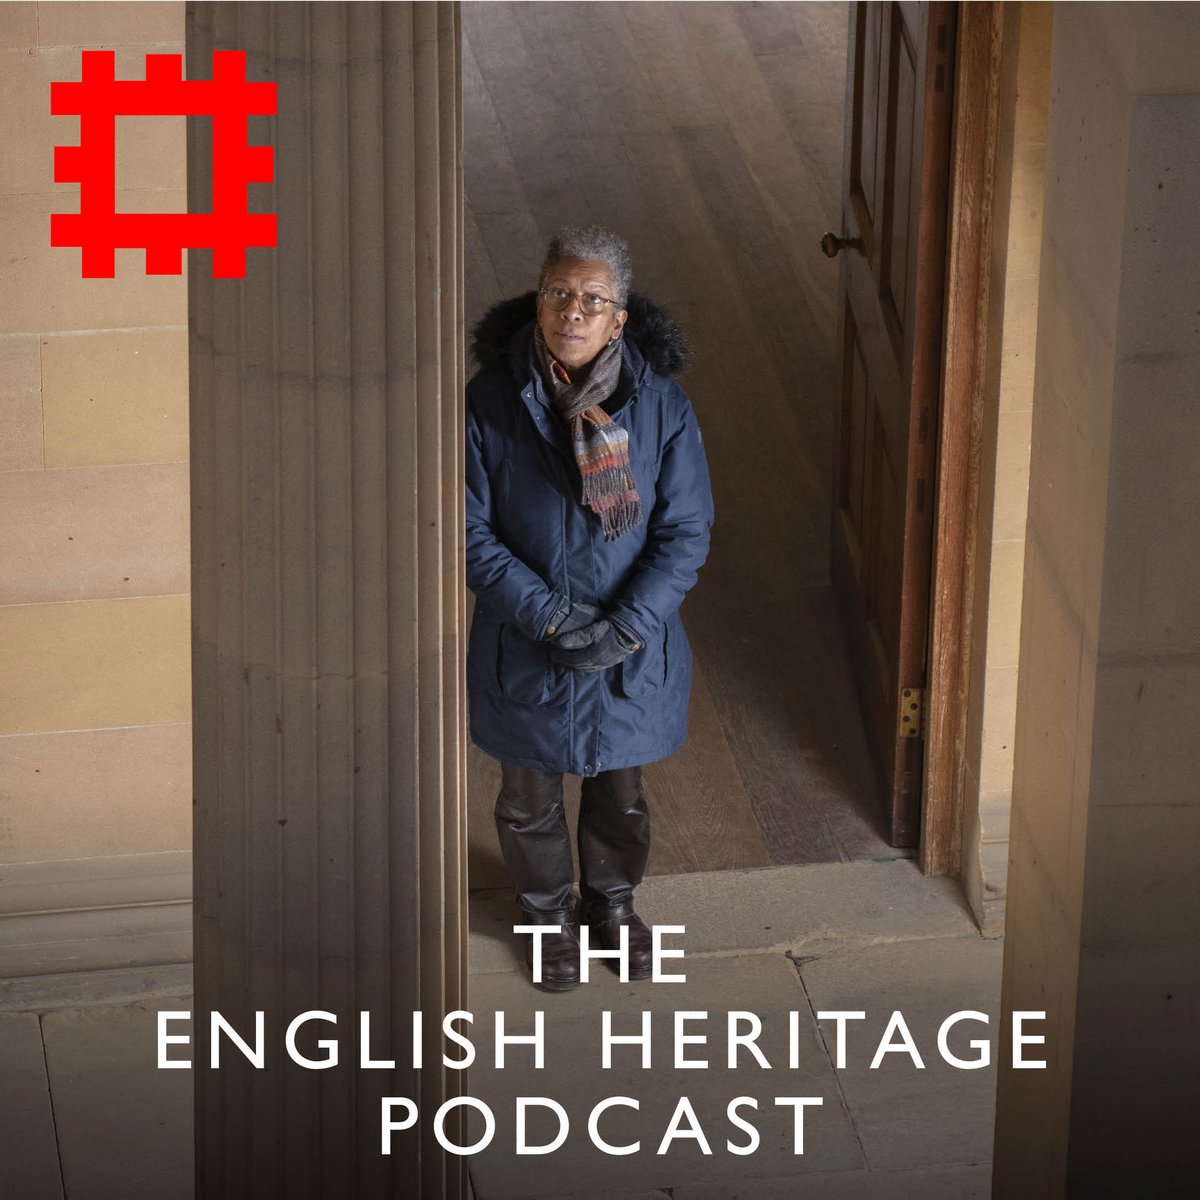 In the latest English Heritage podcast, listen to Ingrid Pollard MBE discuss her new art installation at Belsay. Discover what inspired her artwork and what you can expect to find during a visit as a result. Listen here 👉 english-heritage.org.uk/visit/inspire-…